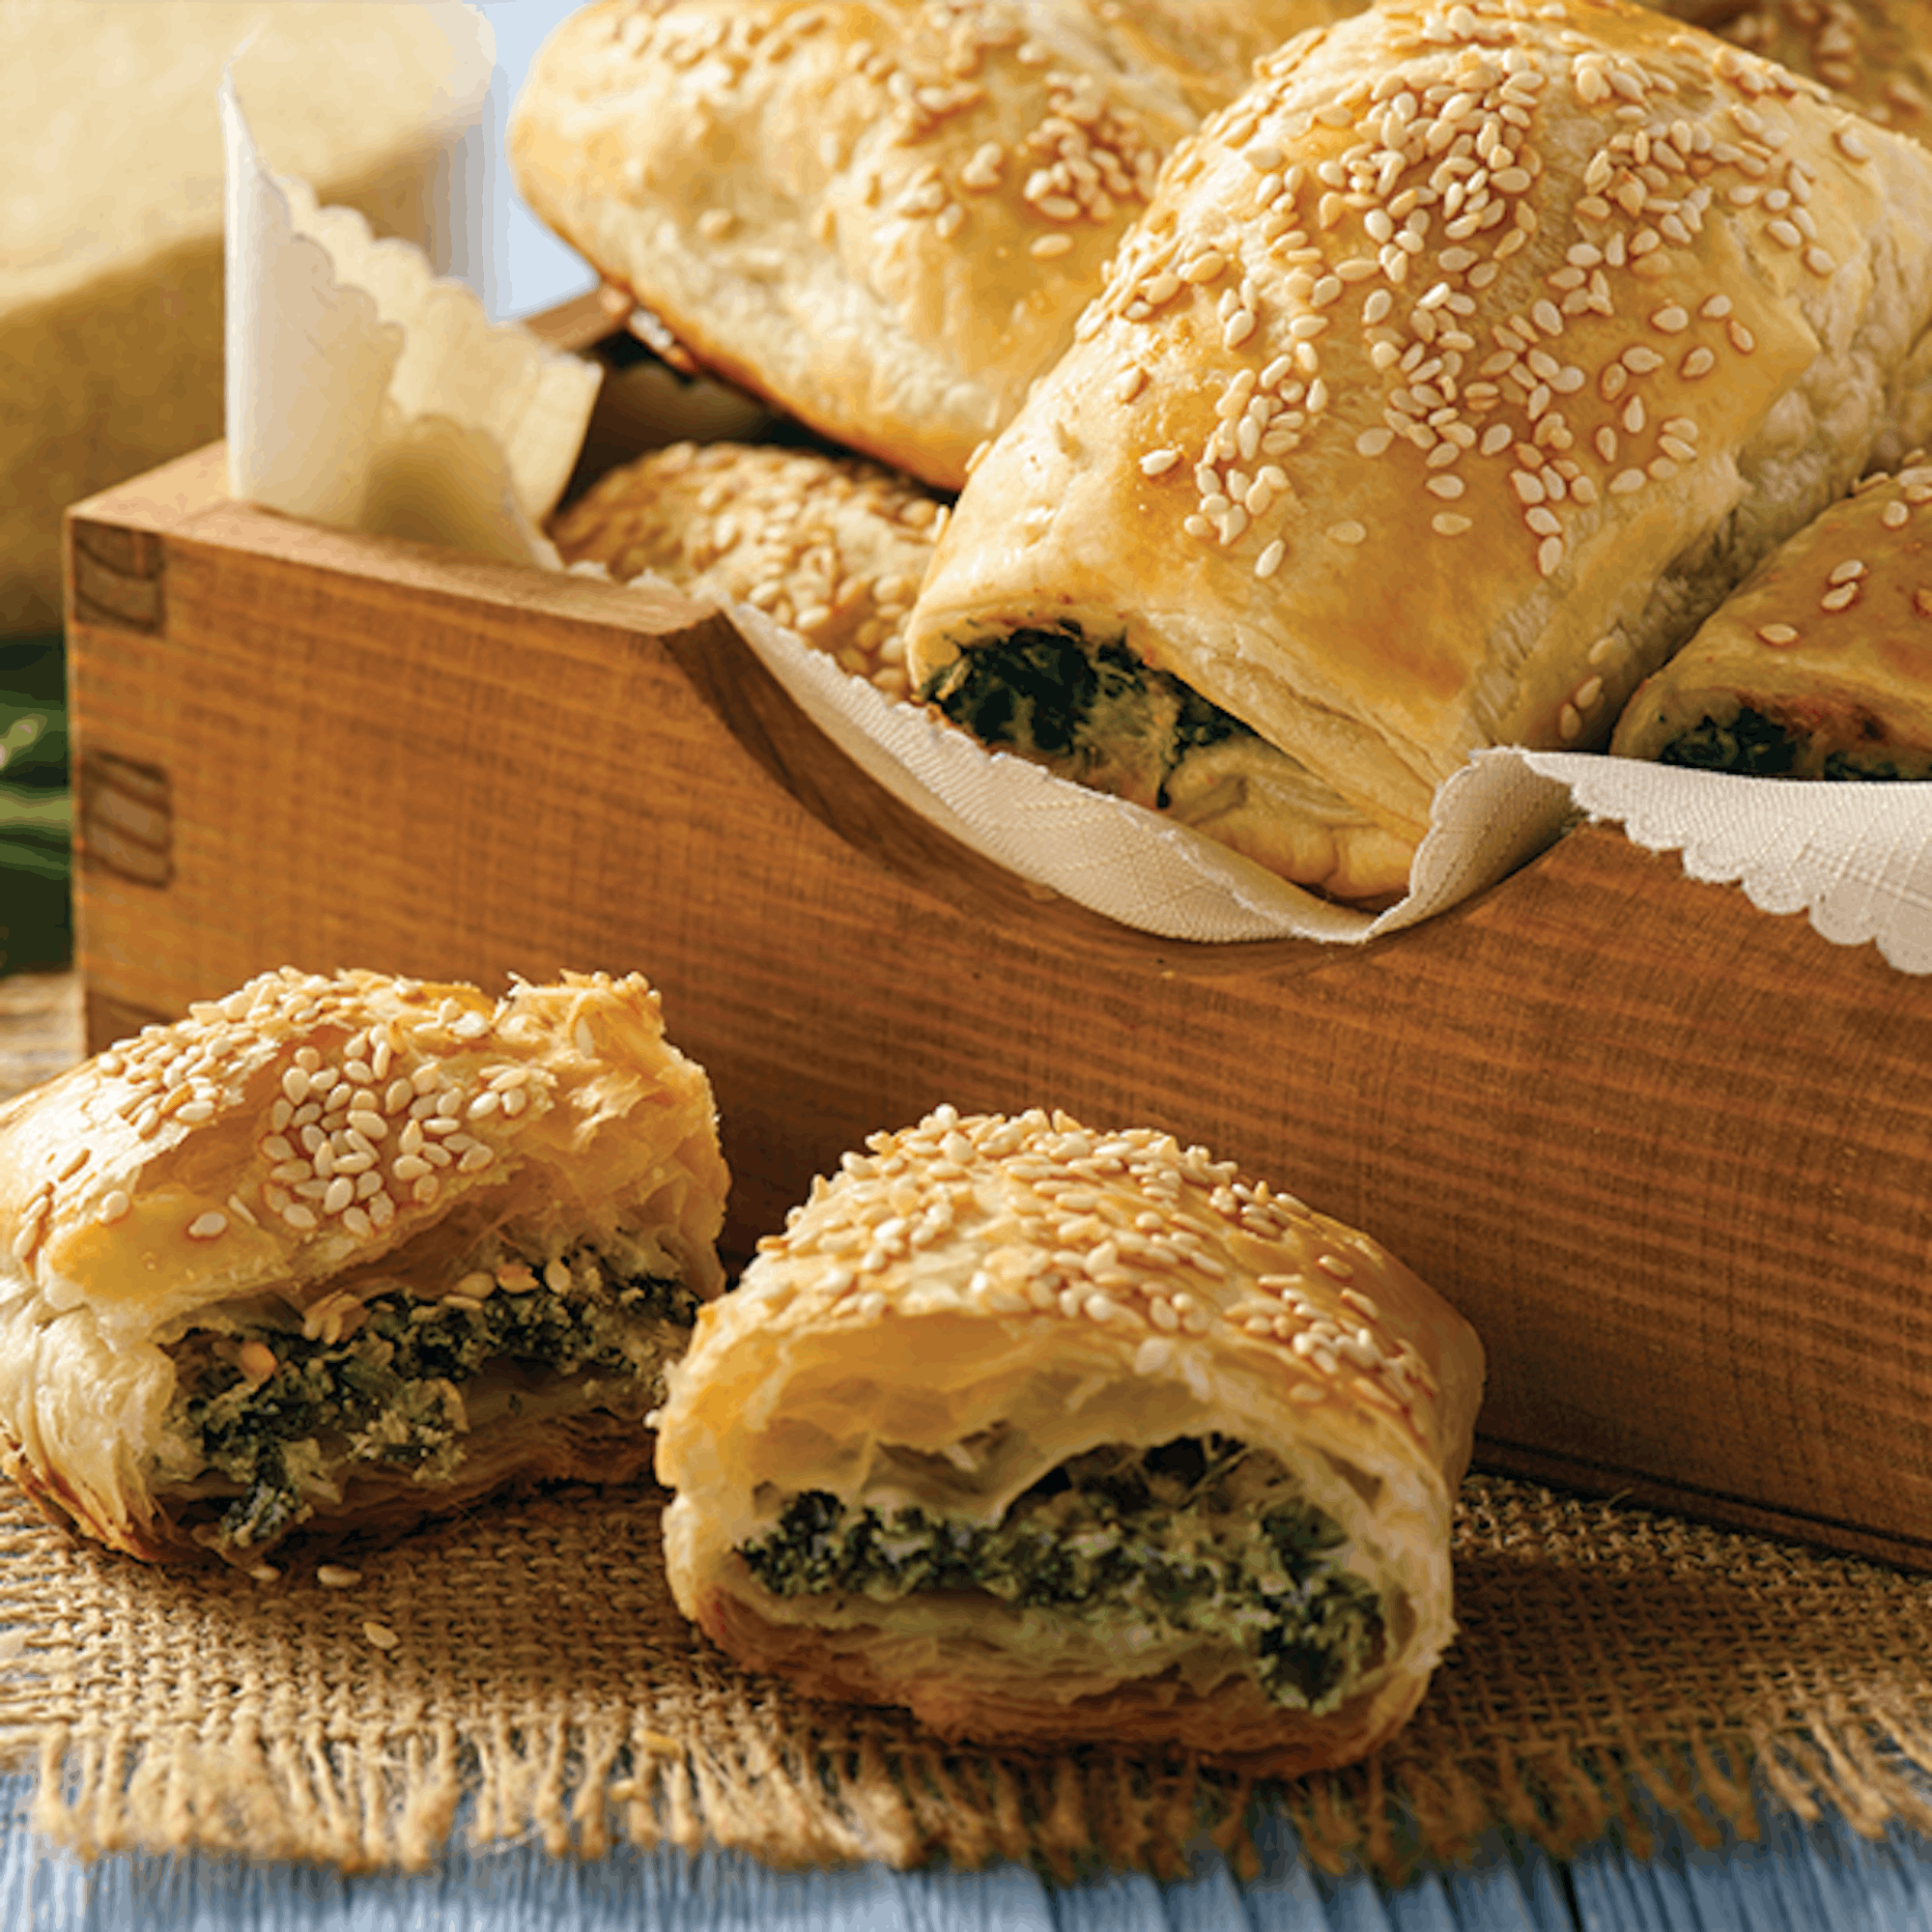 Spinach and Ricotta Rolls